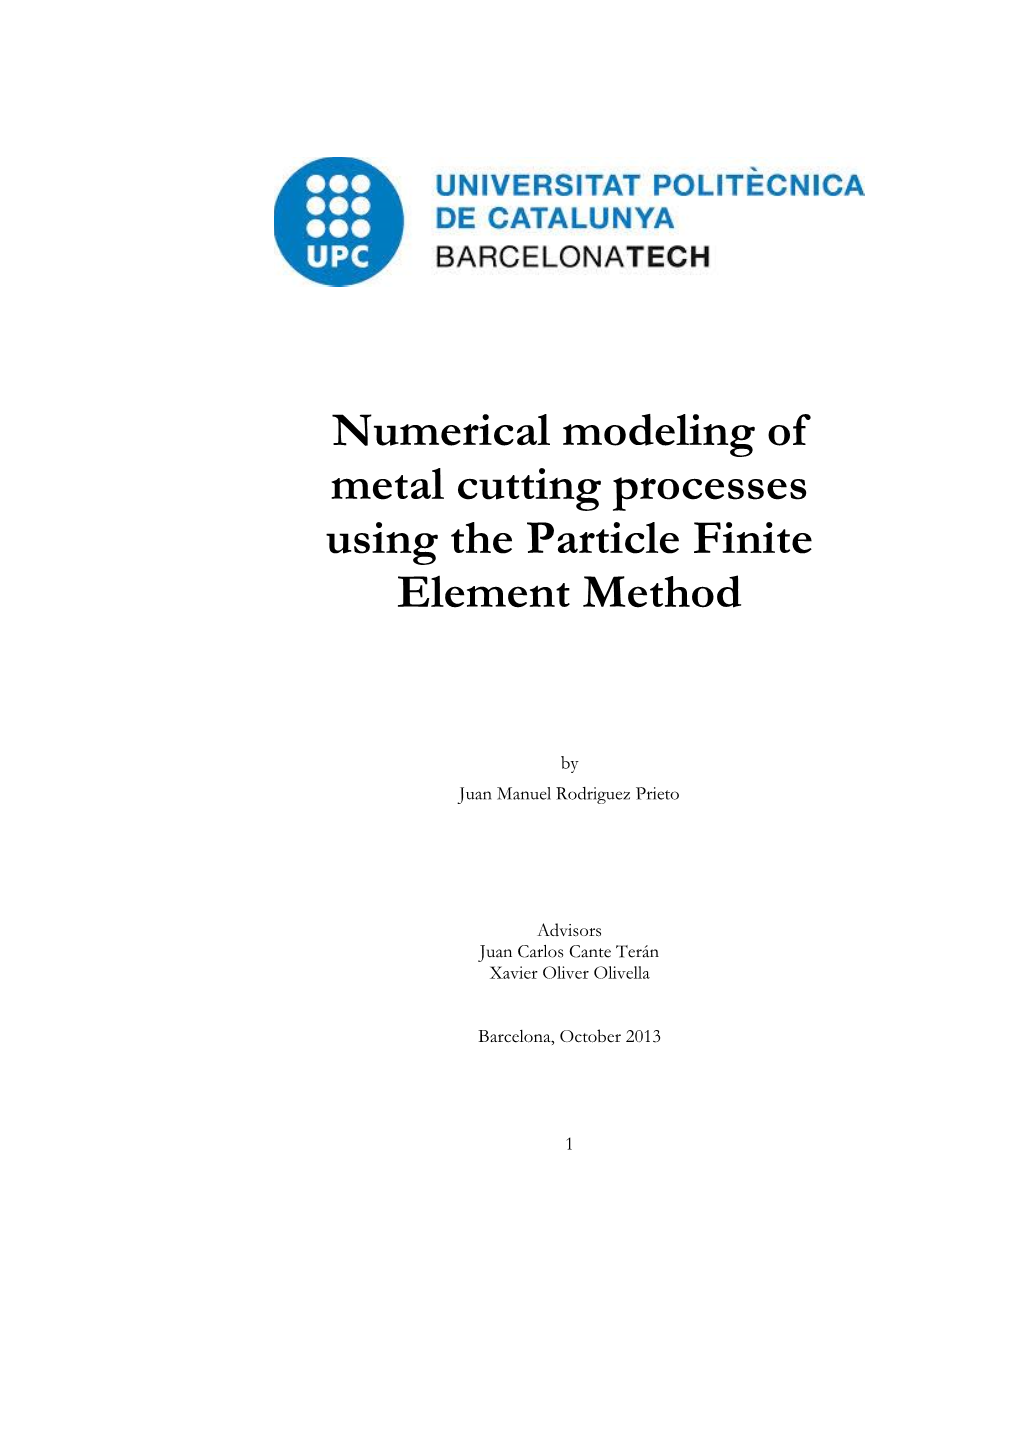 Numerical Modeling of Metal Cutting Processes Using the Particle Finite Element Method